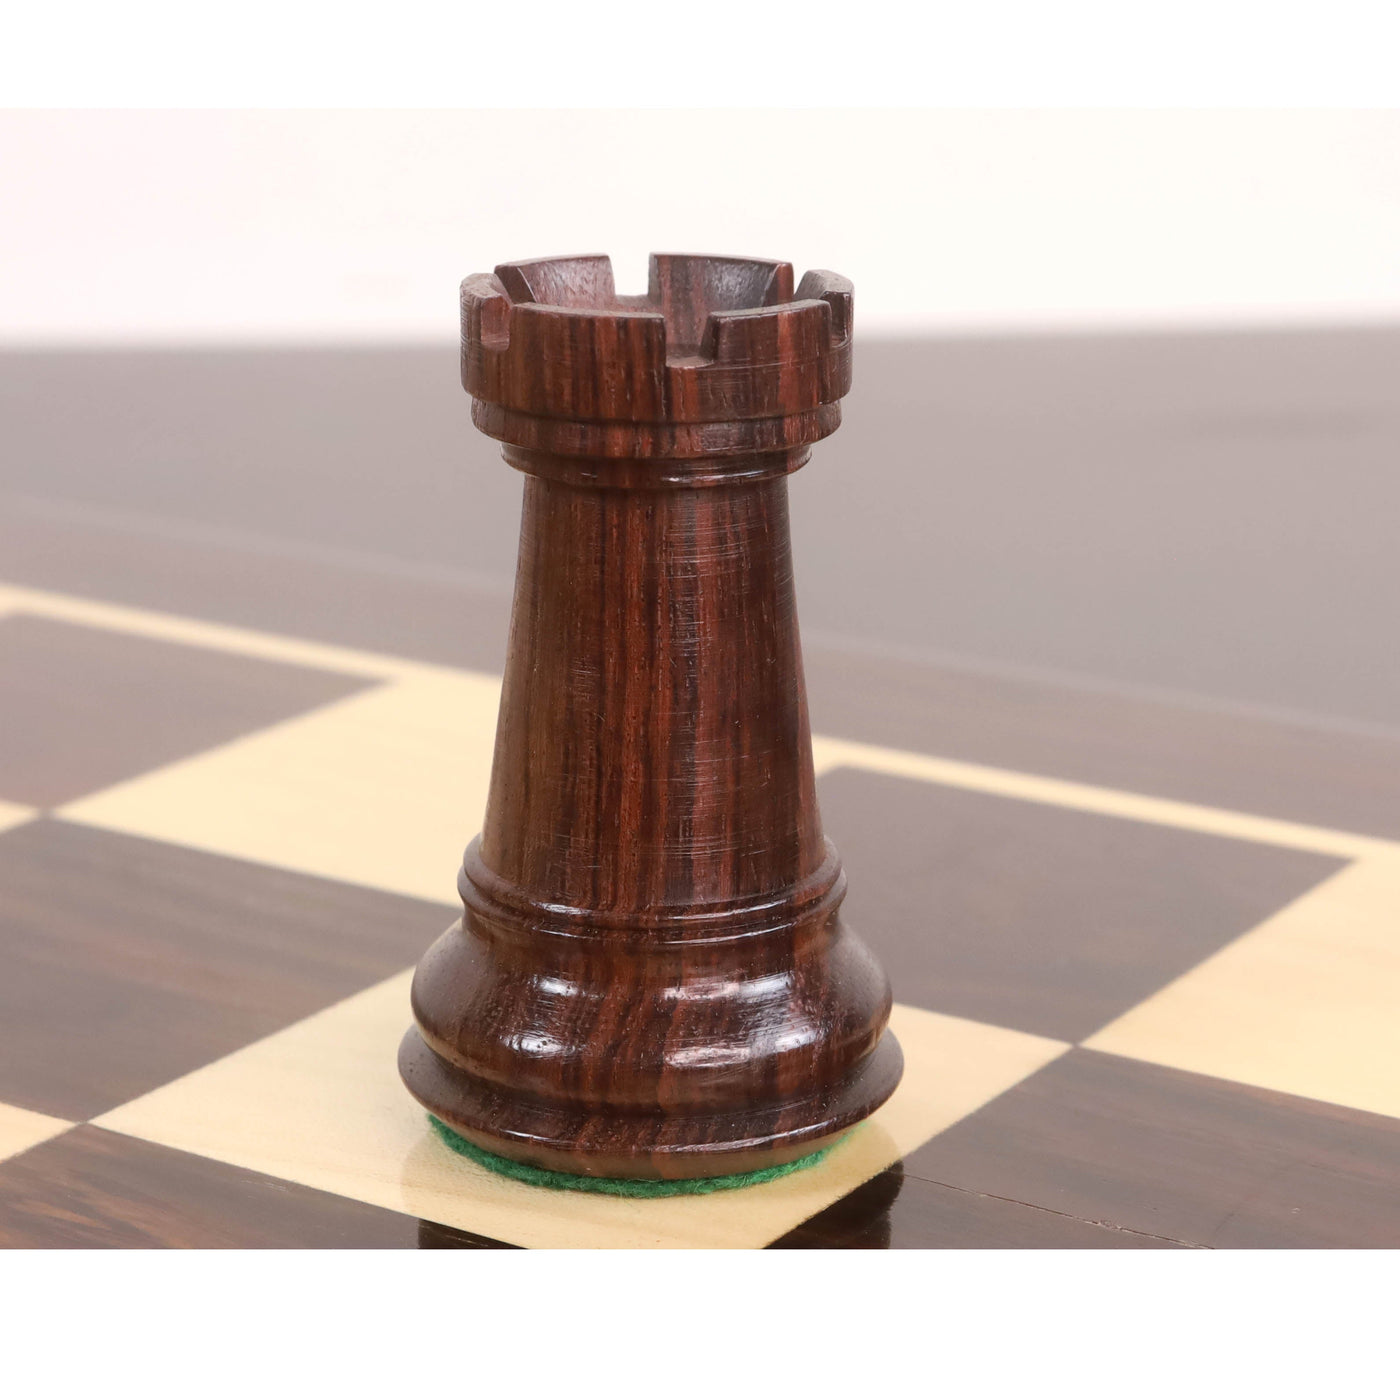 4" Sleek Staunton Luxury Chess Set - Chess Pieces Only - Triple Weighted Rose Wood